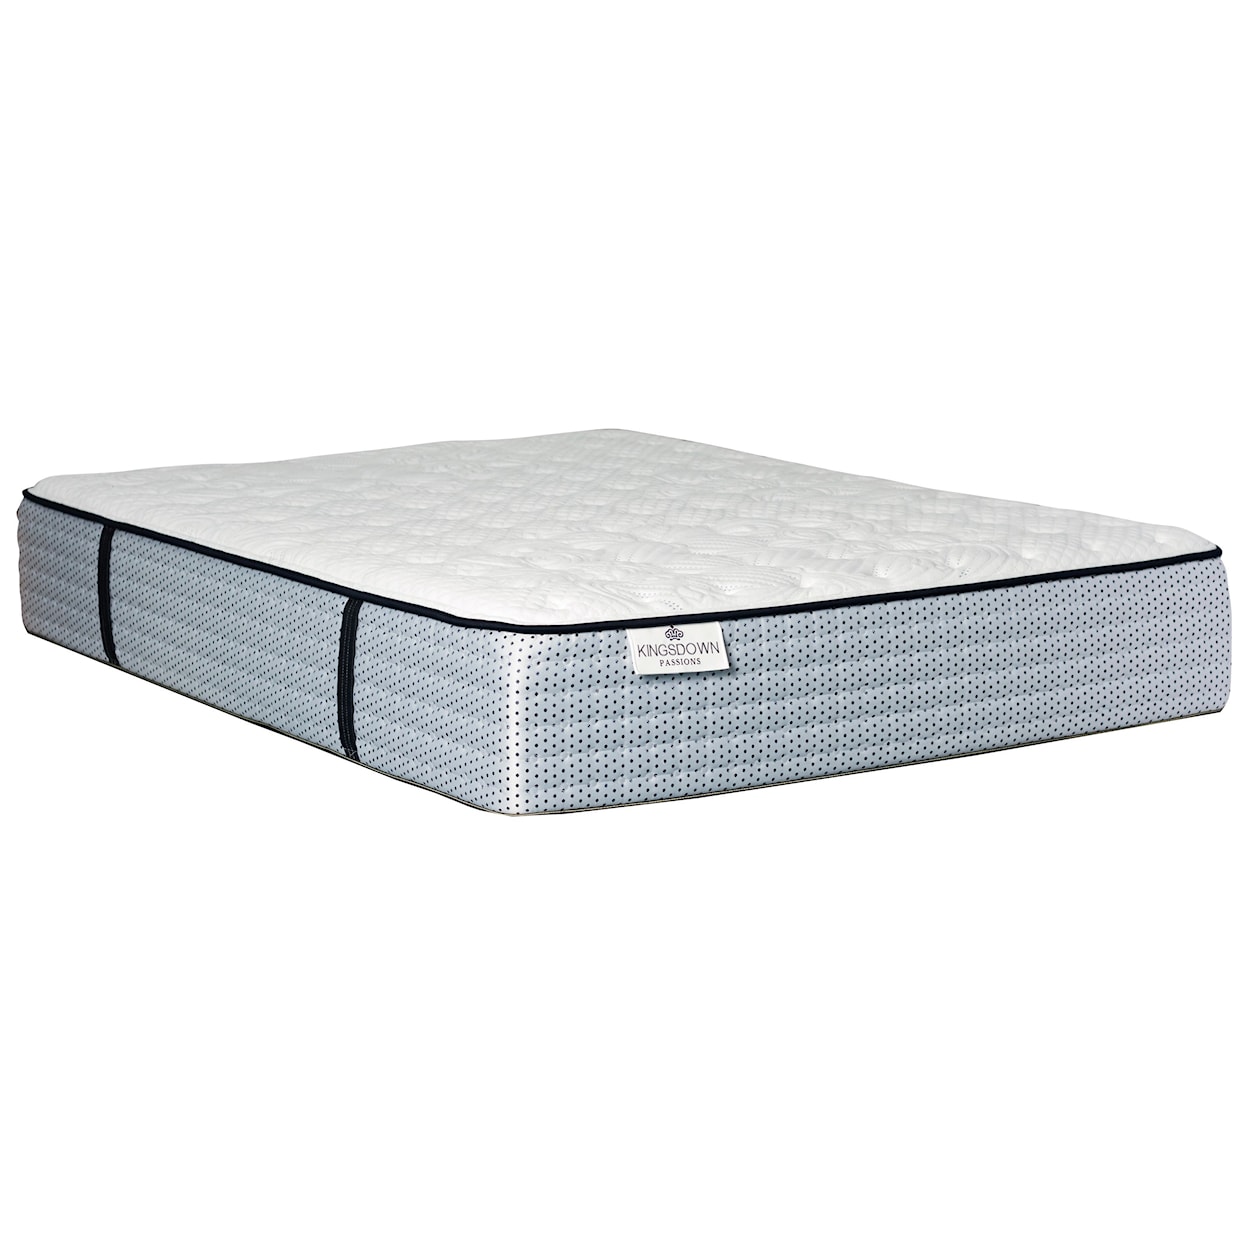 Kingsdown Passions Le Claire TT Twin XL Pocketed Coil Mattress